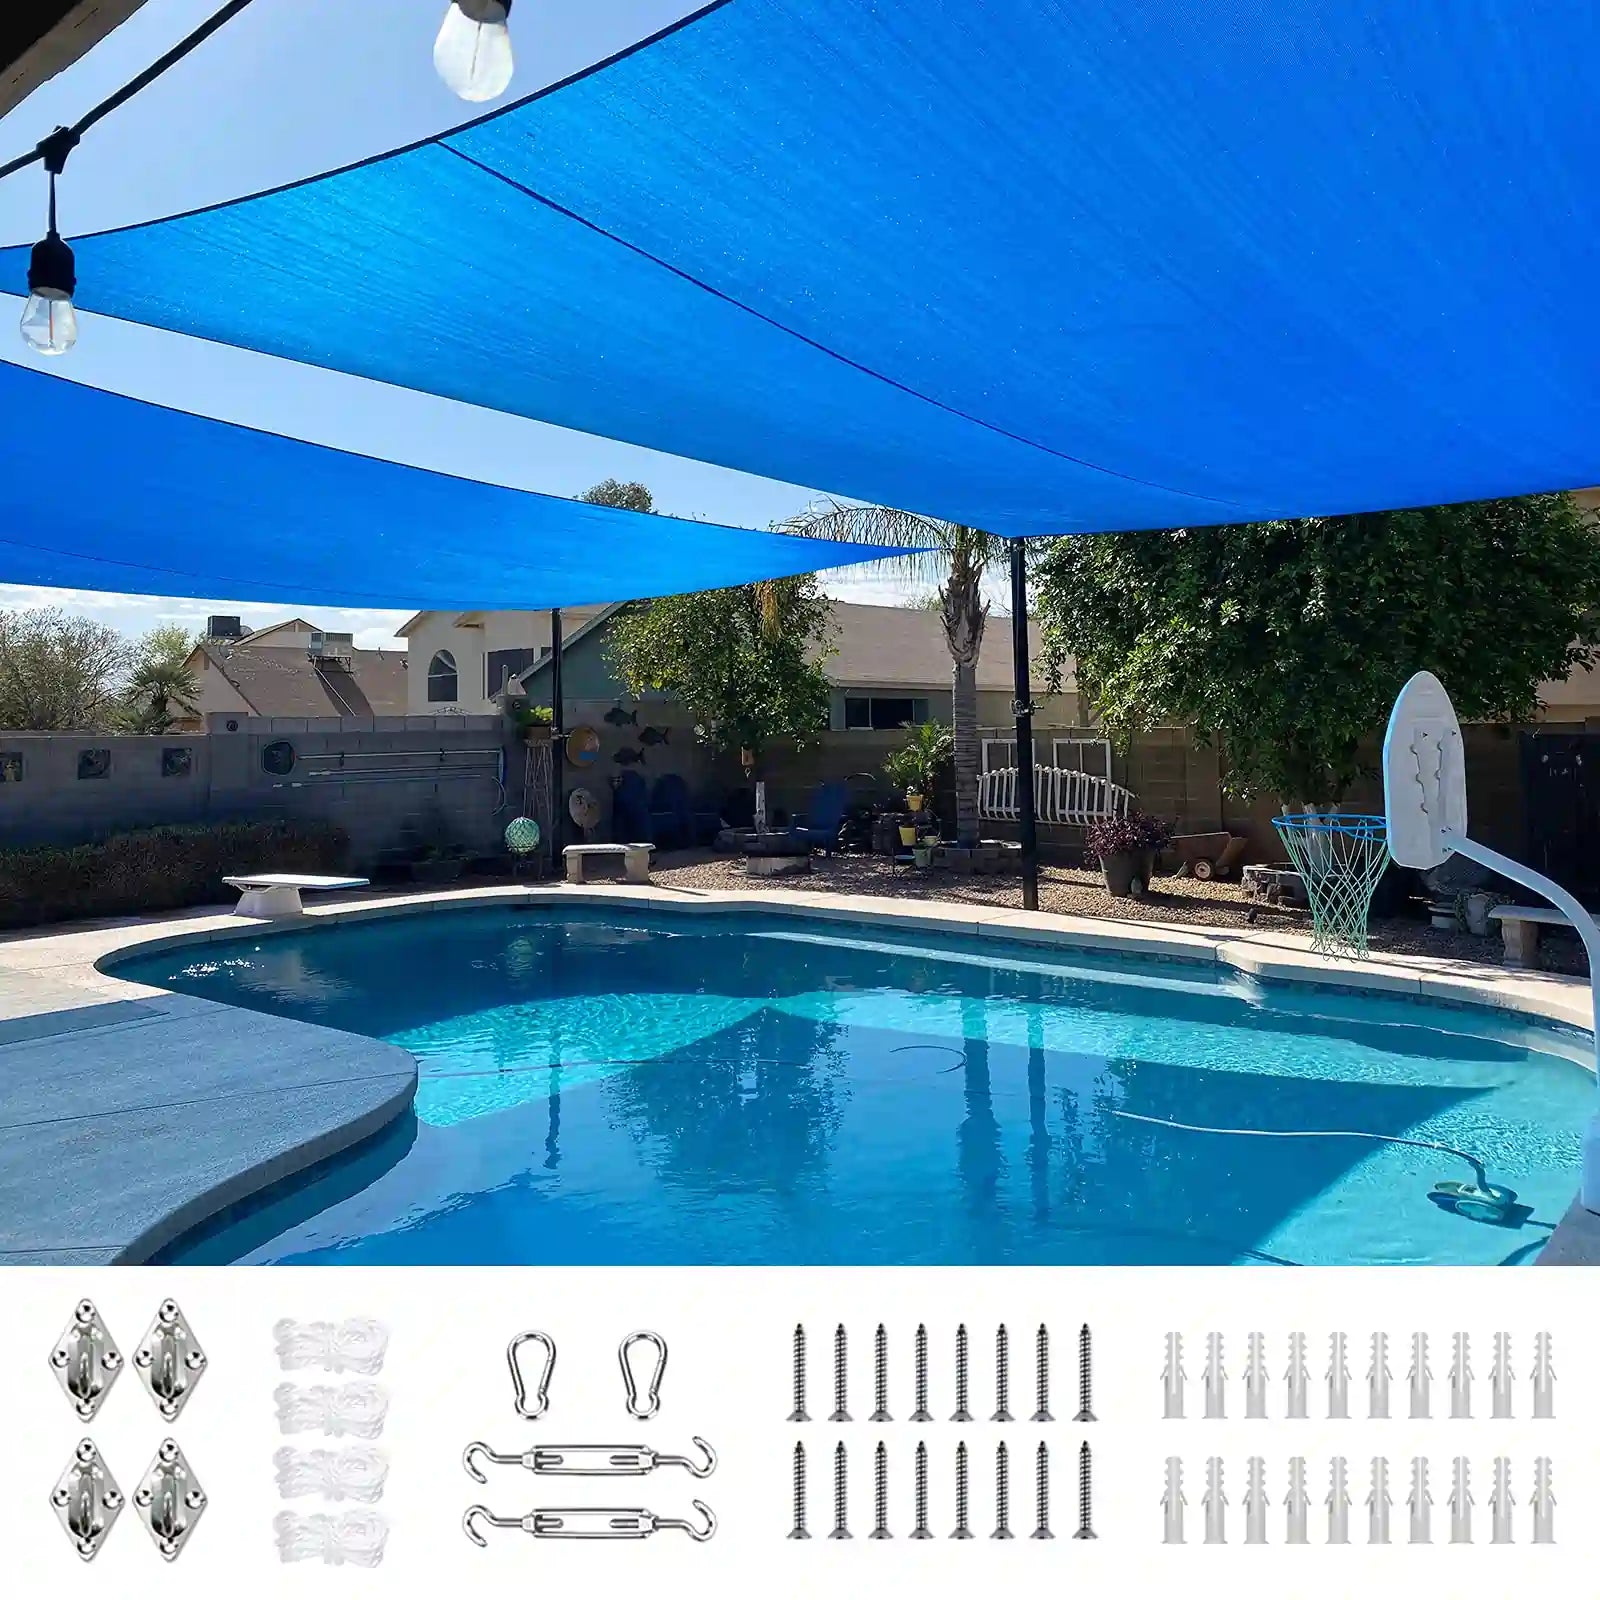 Blue 26 x 20 ft rectangle shade sail for pool shade#color_blue